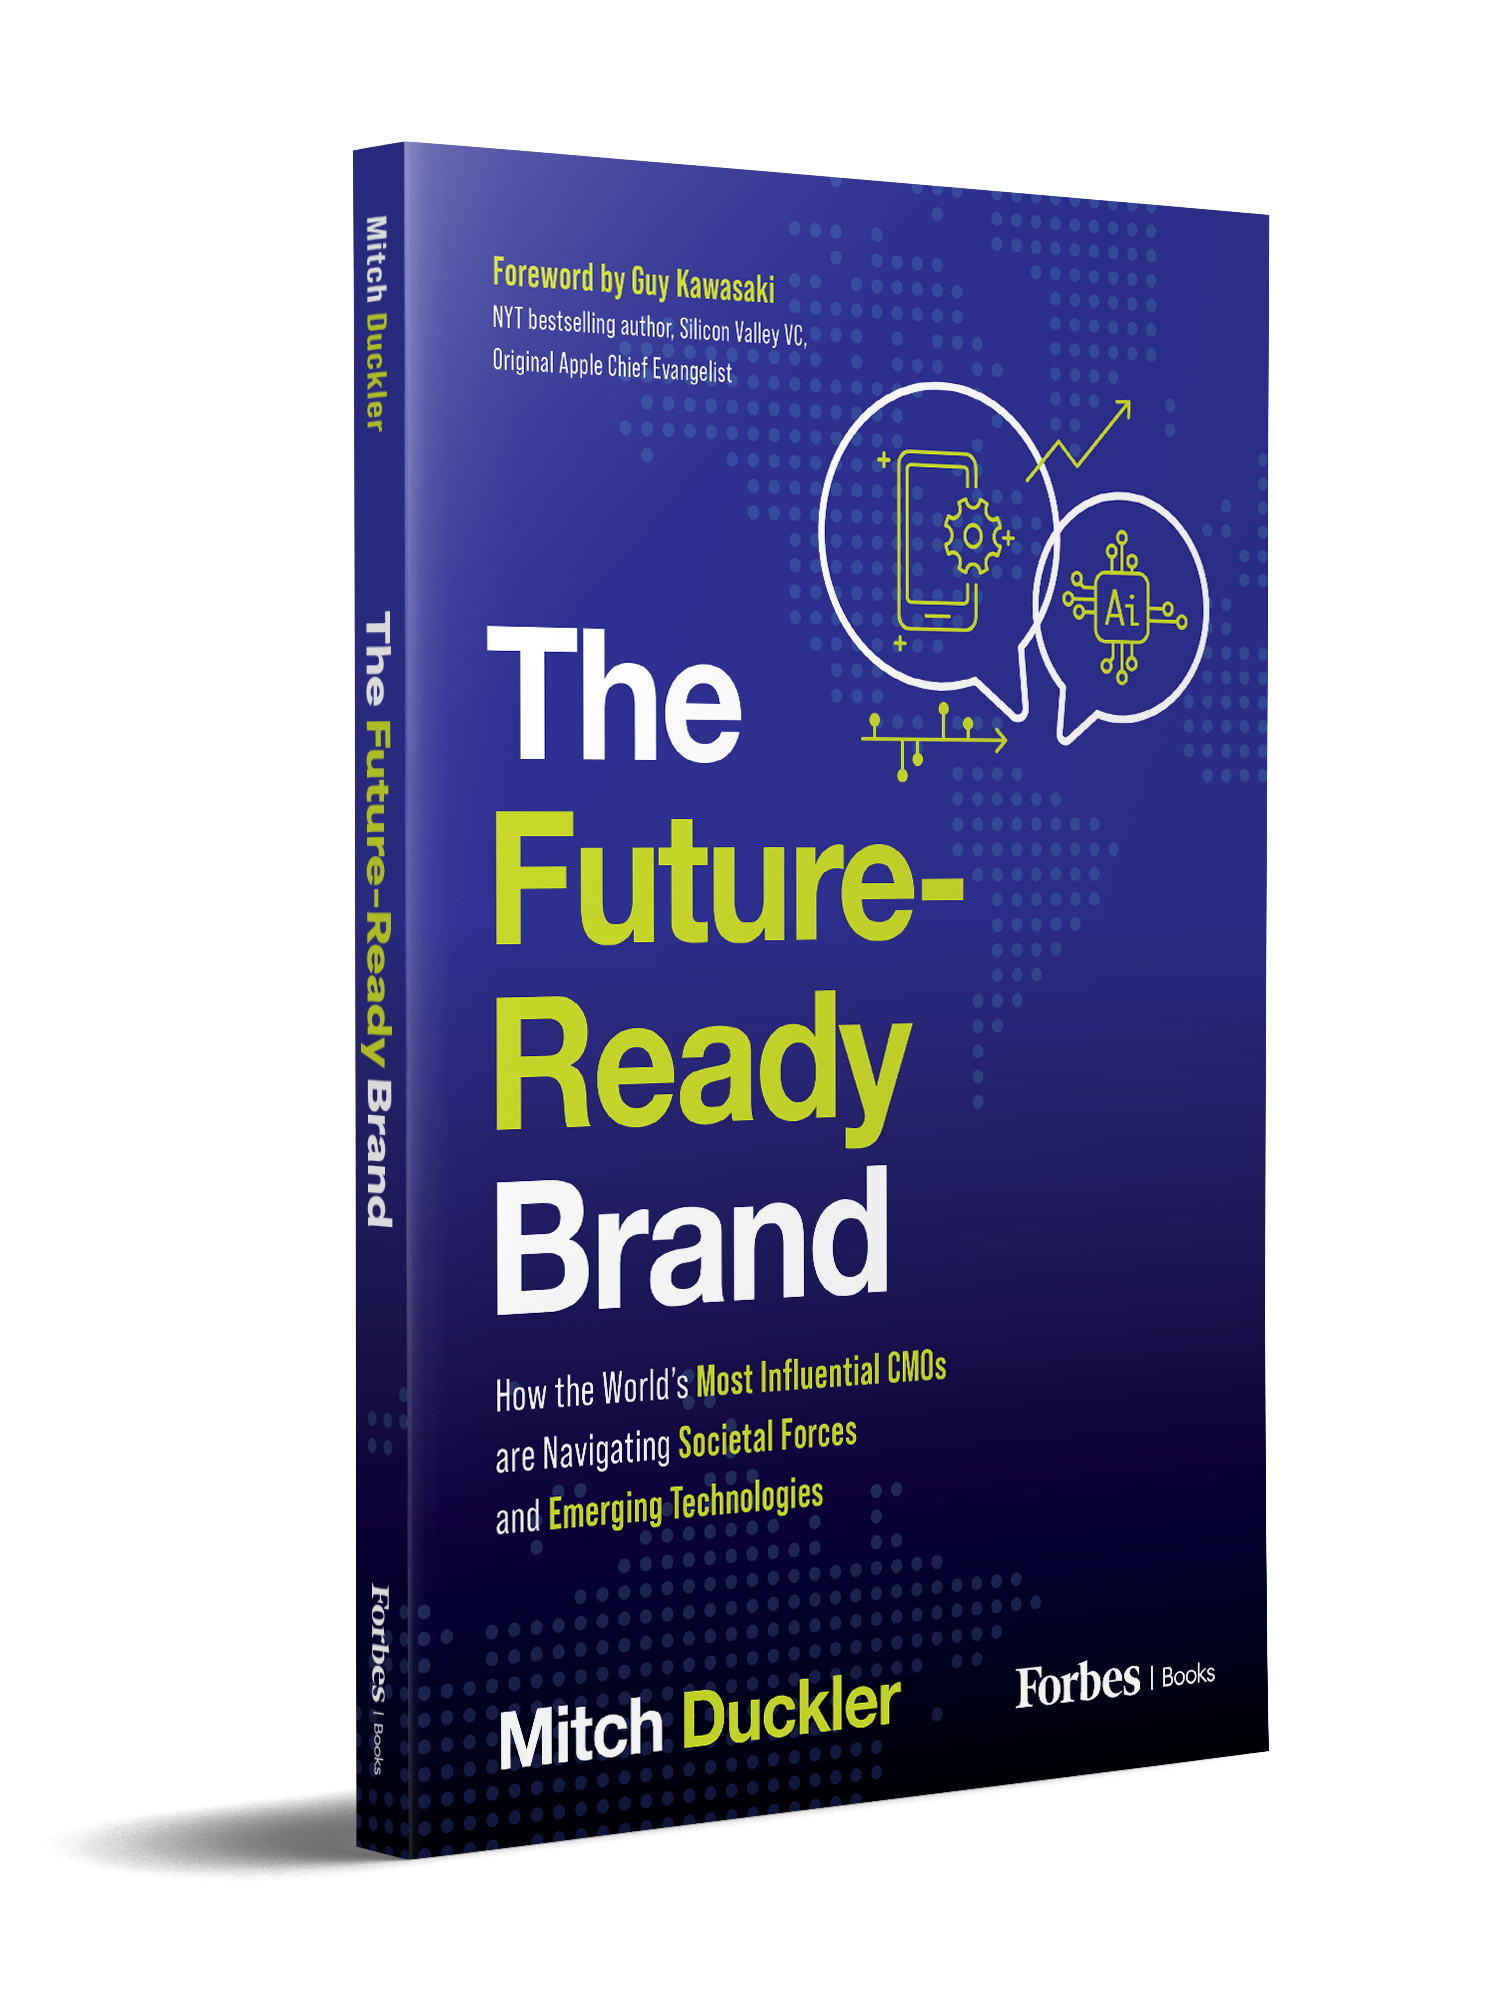 The Future Ready Brand: Insights from Top CMOs – with Mitch Duckler